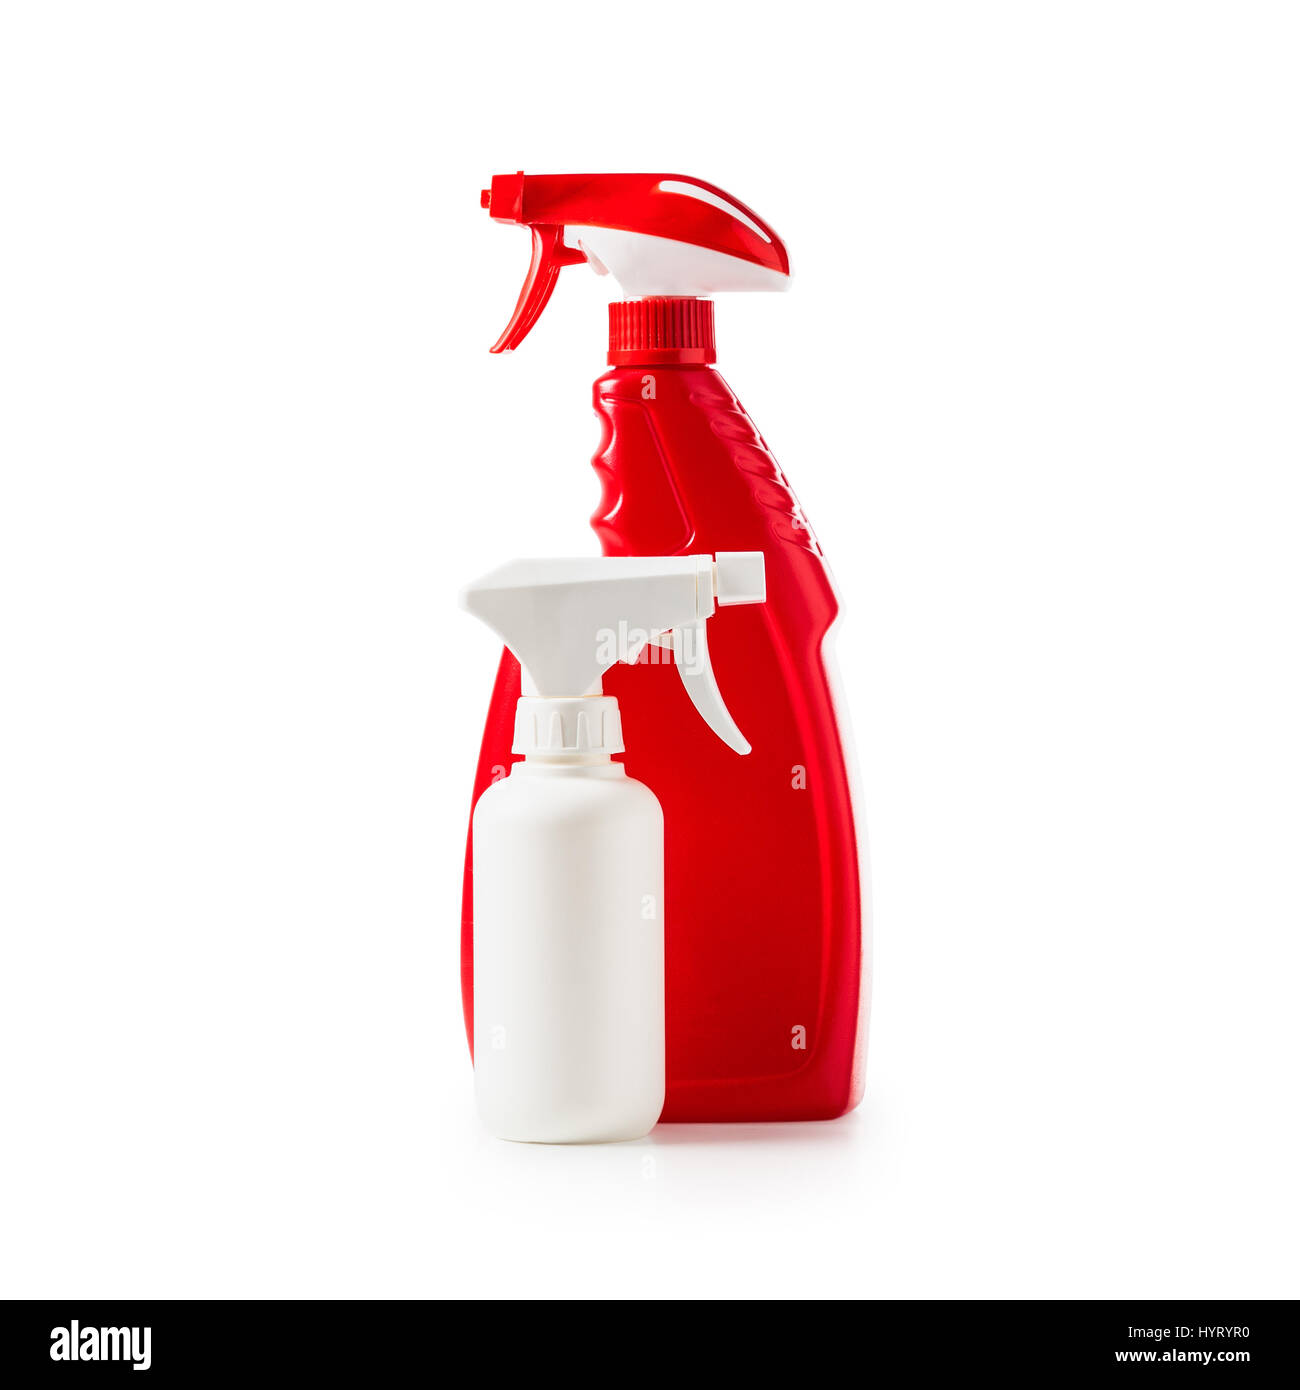 Plastic spray bottles of cleaning products isolated on white background clipping path included Stock Photo